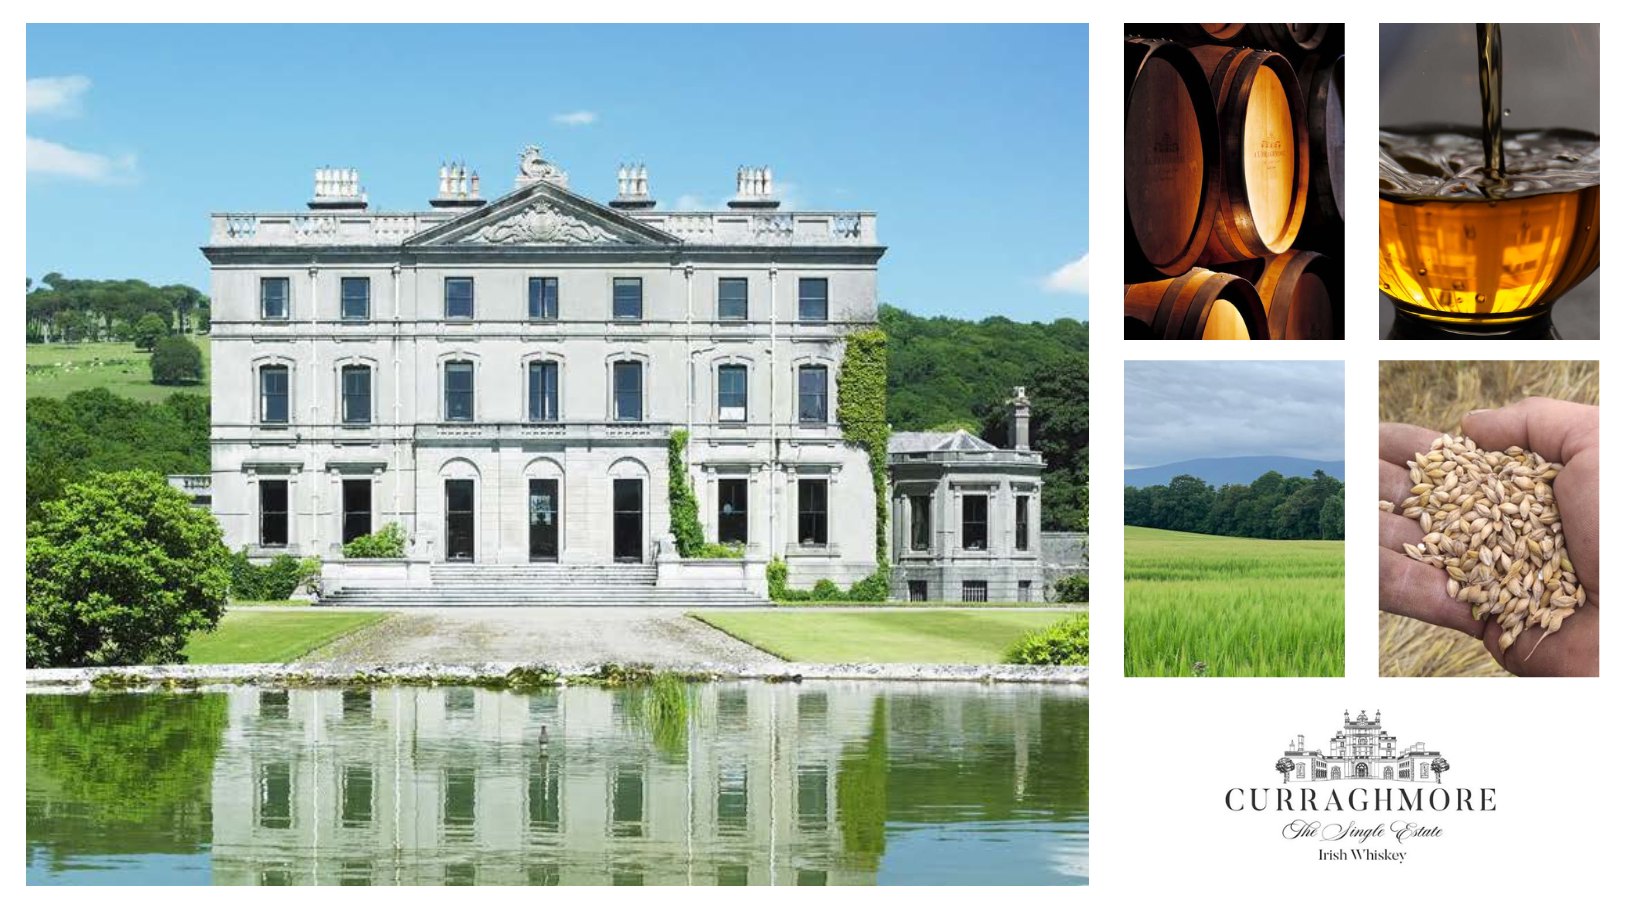 Curraghmore Estate - Carbon-Neutral Organic Whiskey Distillery